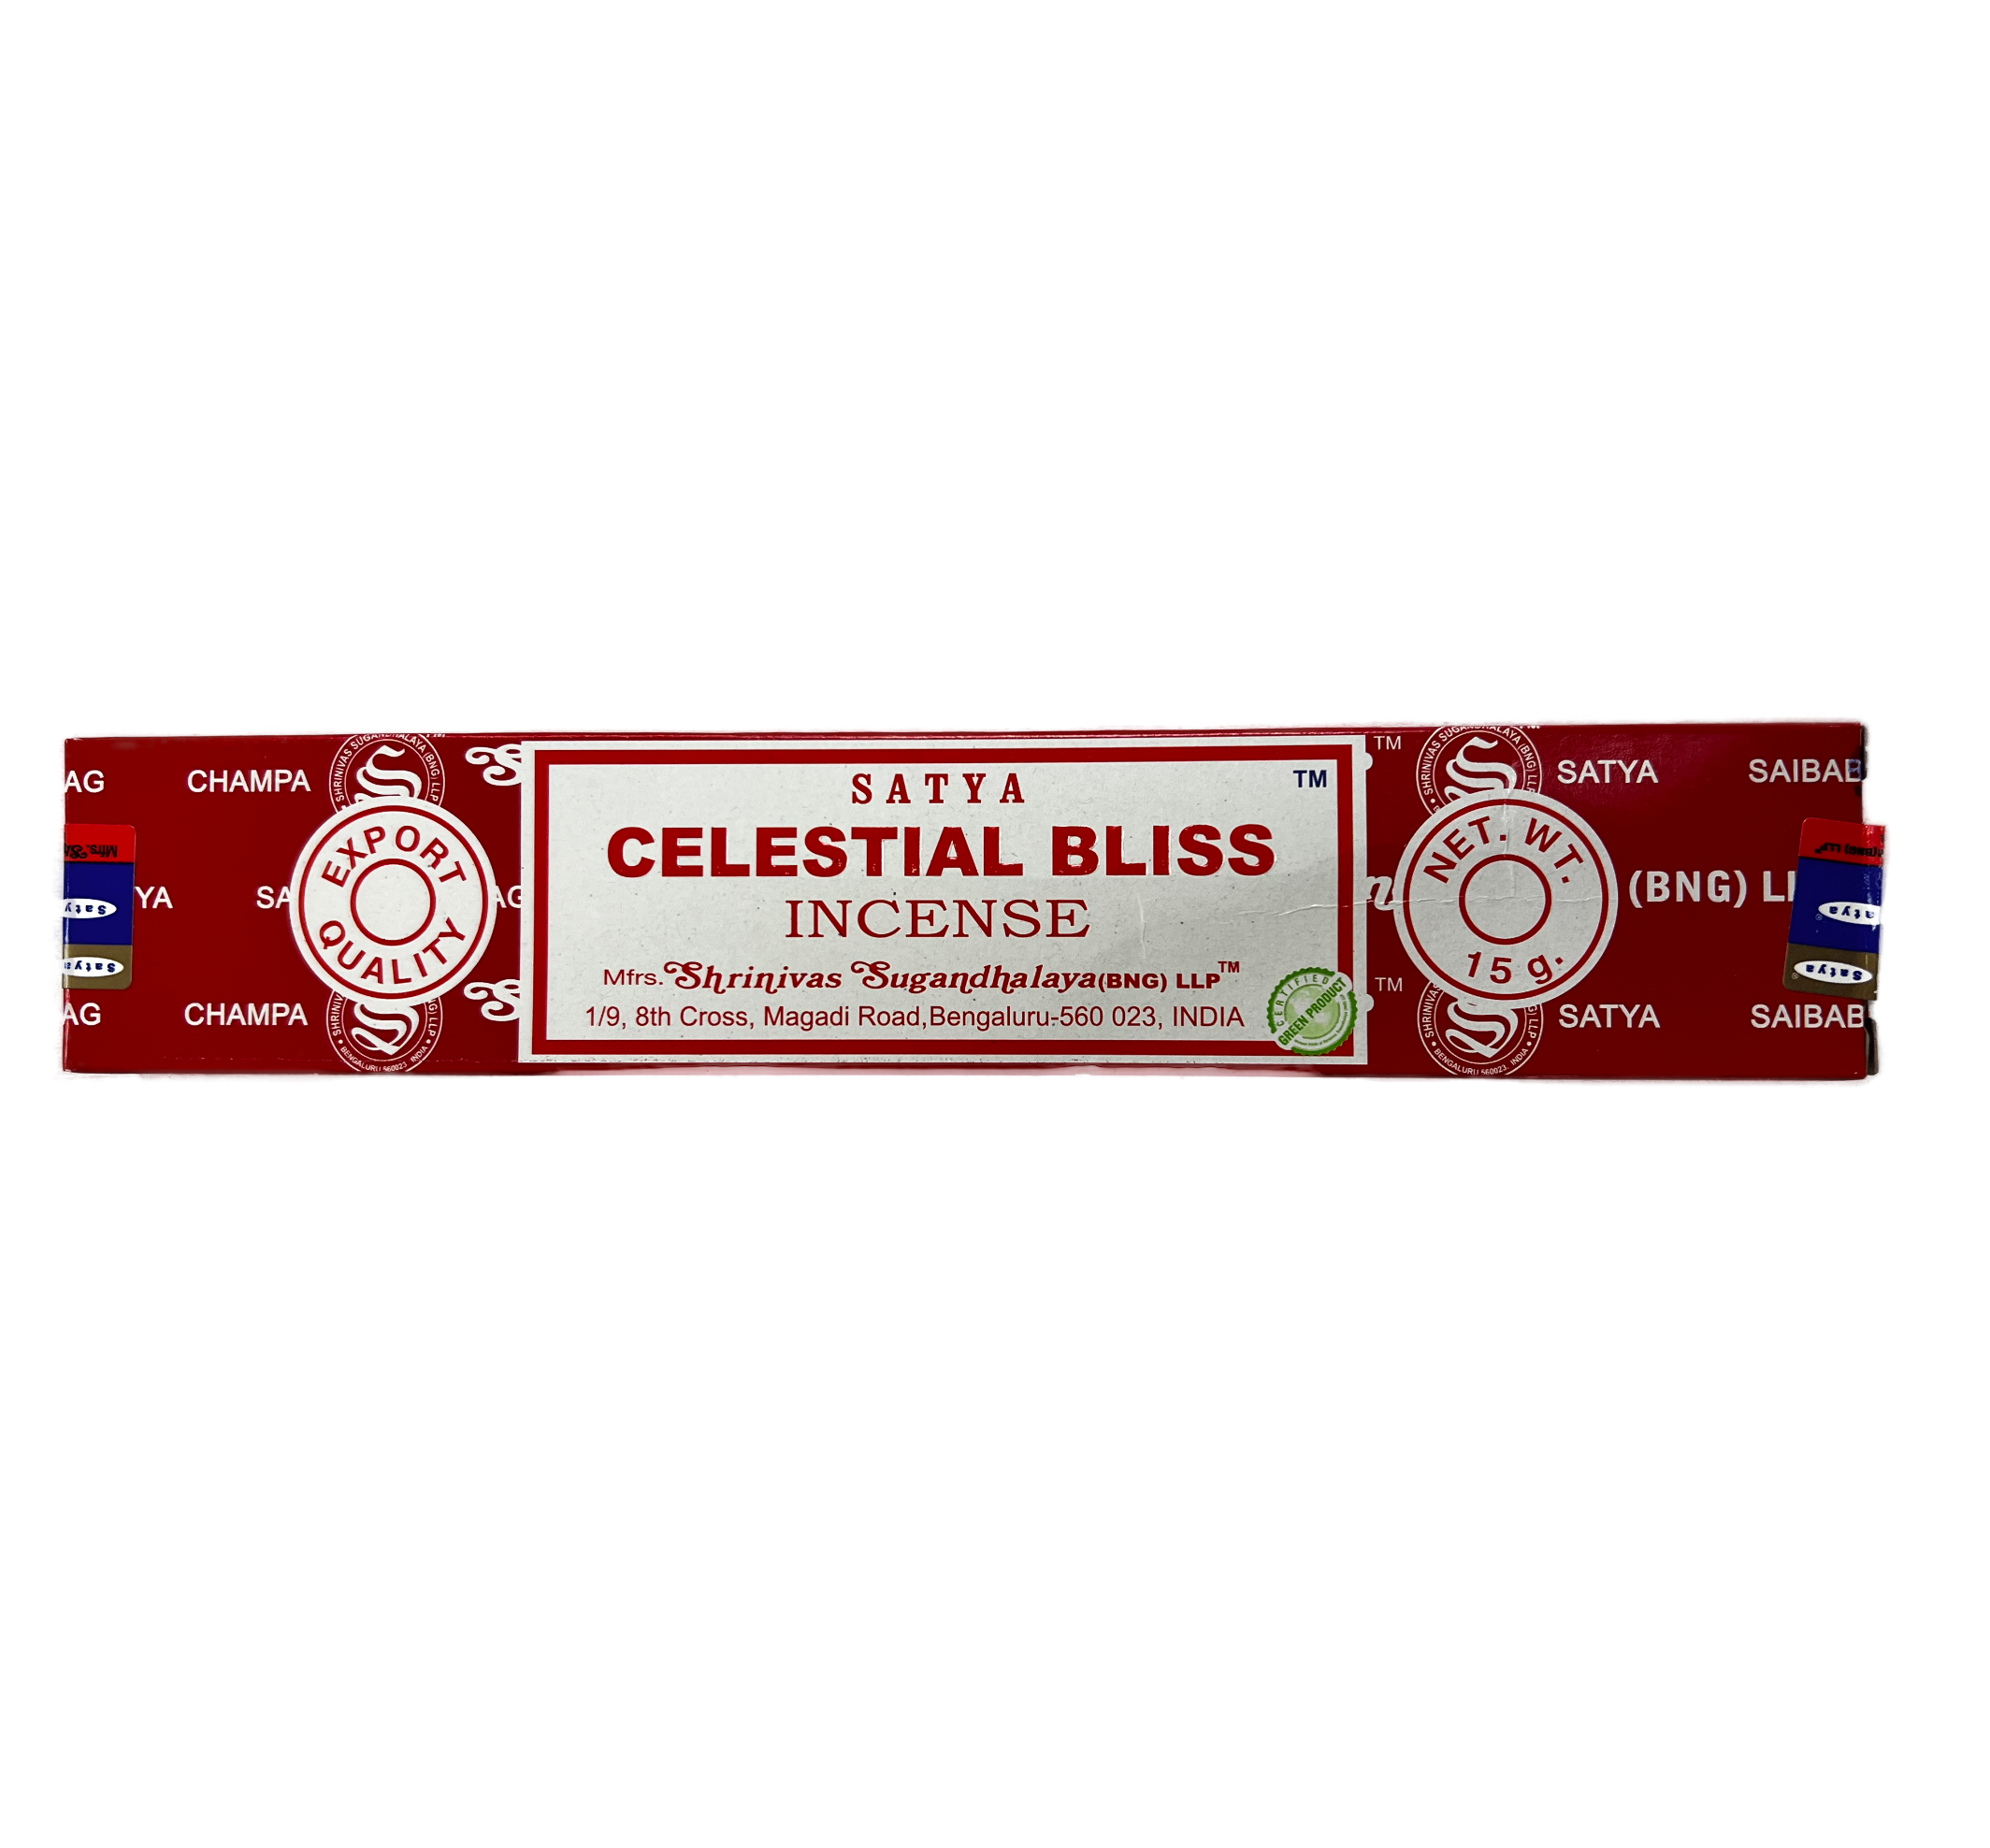 Celestial Incense Sticks. Brown colored box with company name as well as company words listed as a decoration pattern. In the middle of the cover is a white rectangle and red border creating an inner box. Blue oval is the company name Satya. Below that is the title Celestial Incense. At the bottom of the box is the manufacturer&